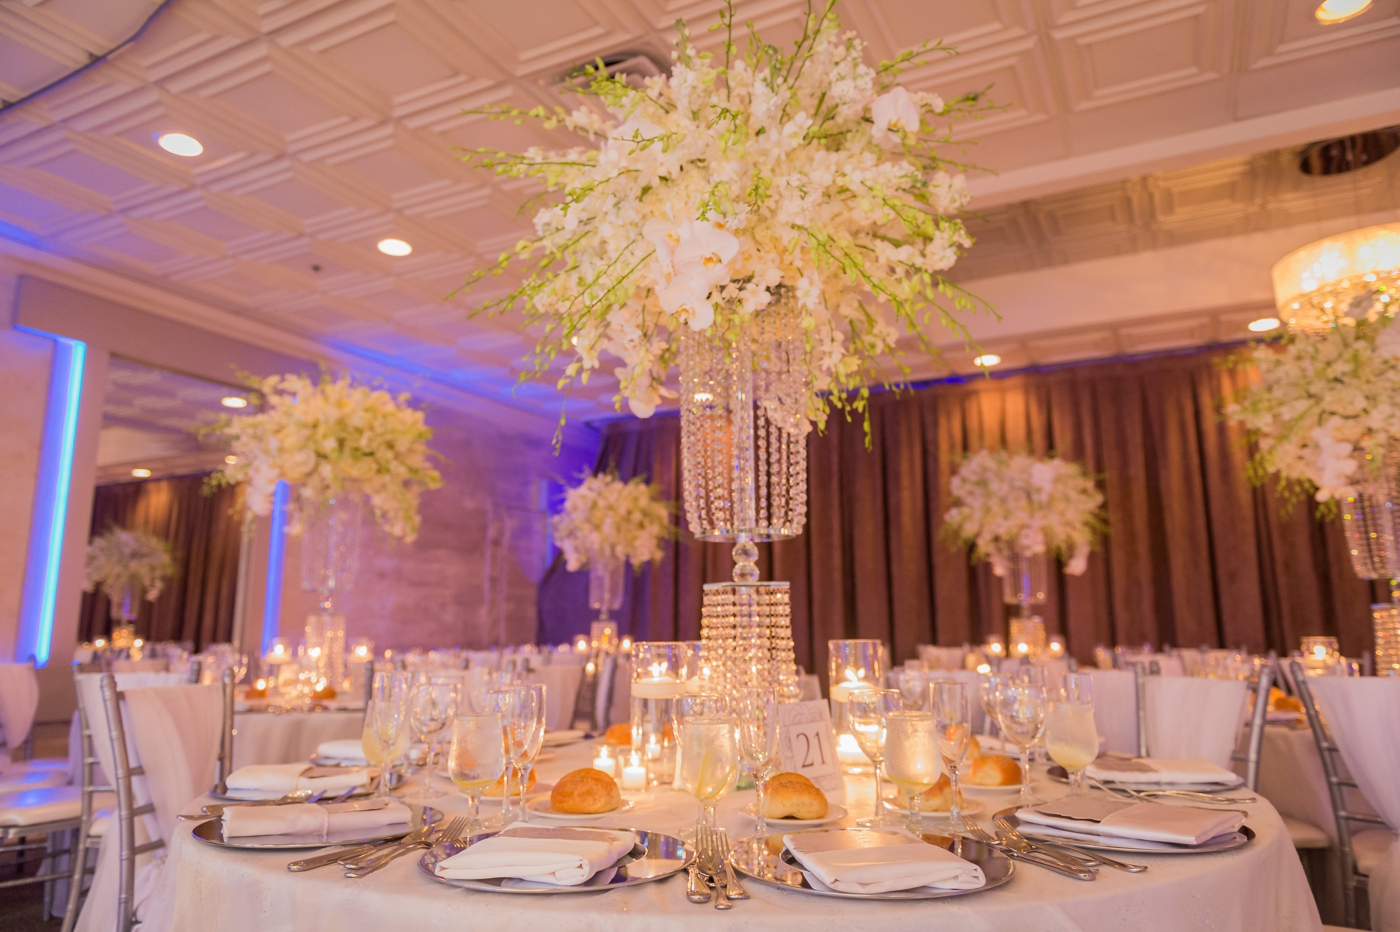 Why you need to hire a professional wedding planner for your NYC wedding